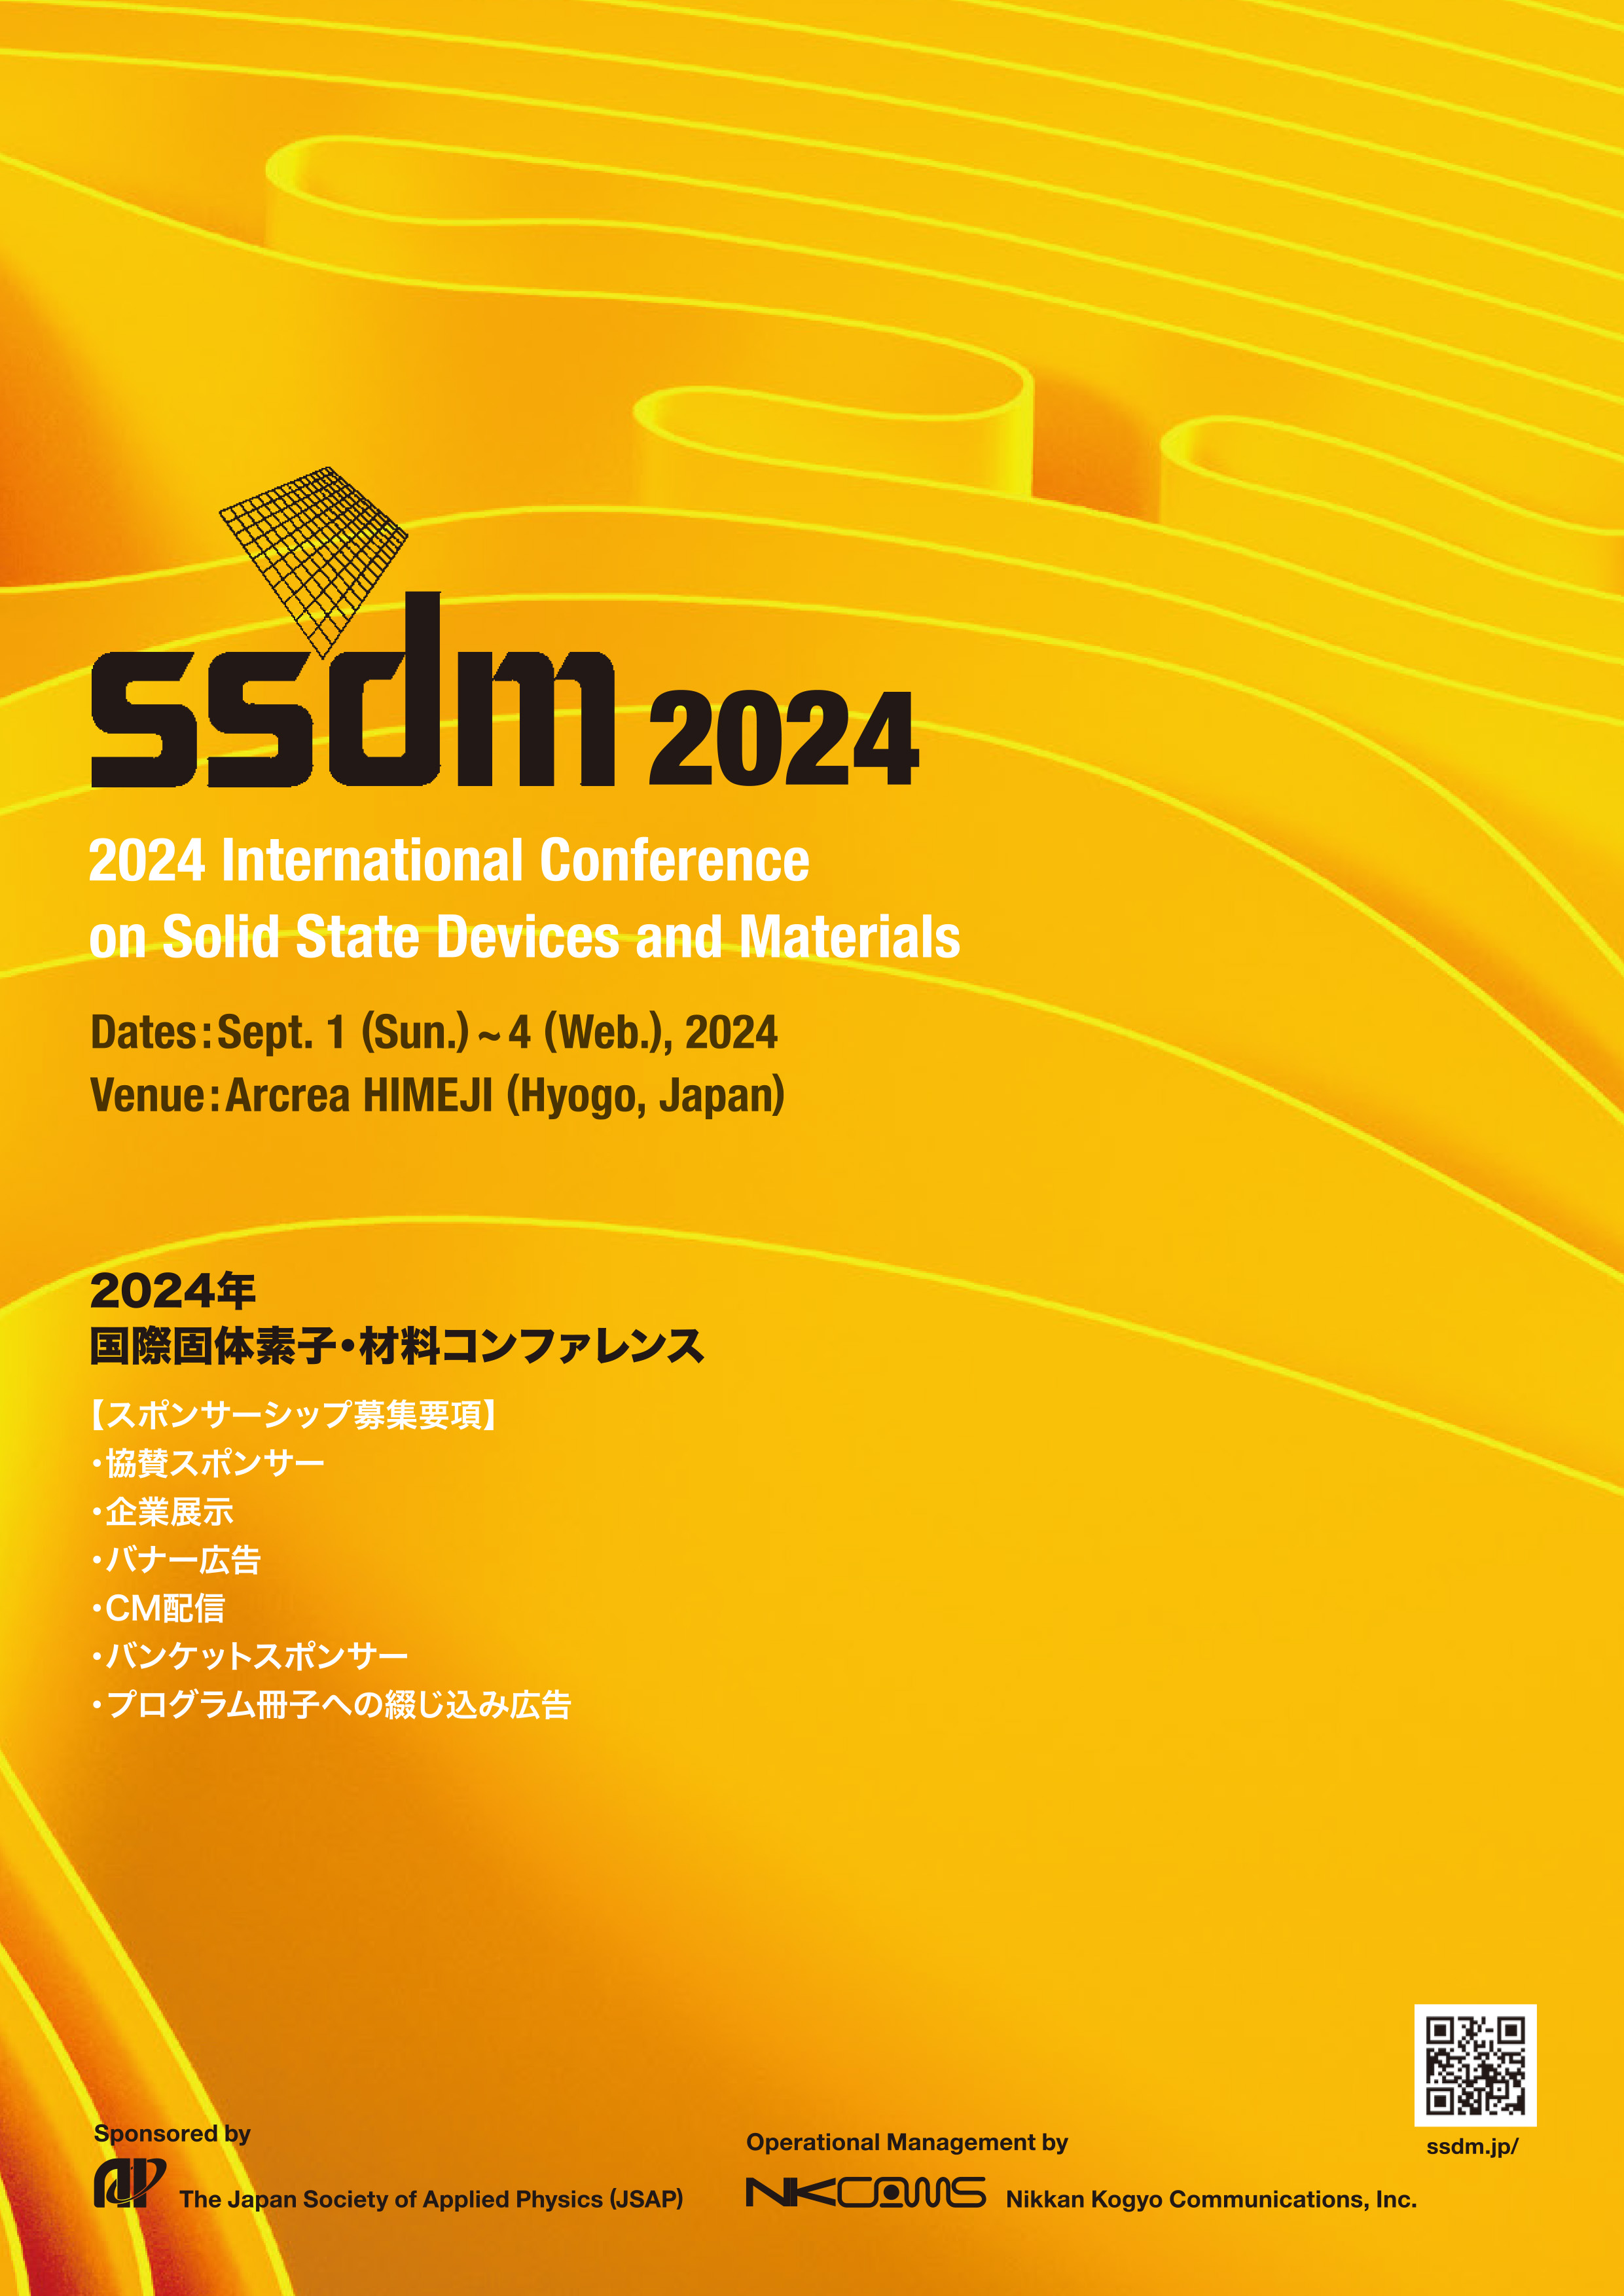 2020 International Conference on Solid State Devices and Materials / 2024年 国際固体素子・材料カンファレンス(SSDM2024）